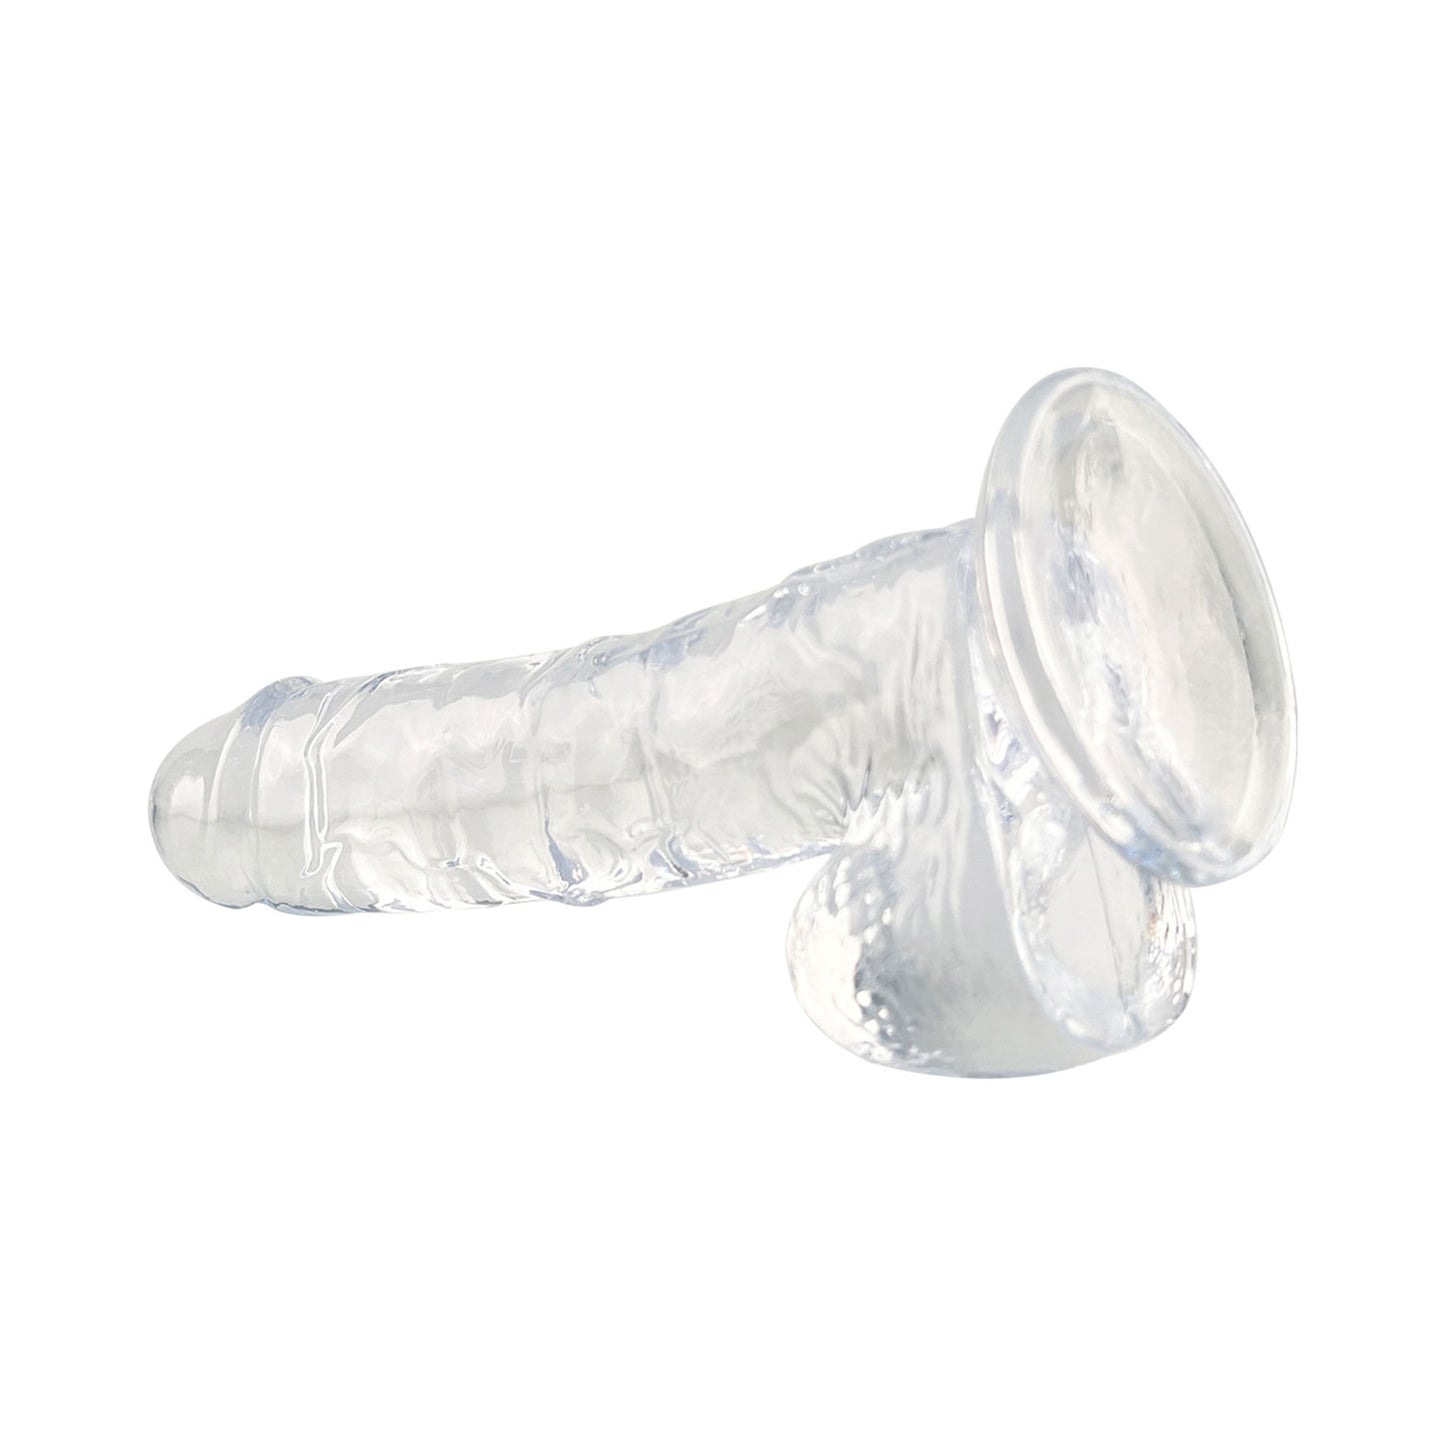 The Horny Company - No Frills Dildo 20.5cm x 3.8cm Suction Cup Dong with Balls Clear